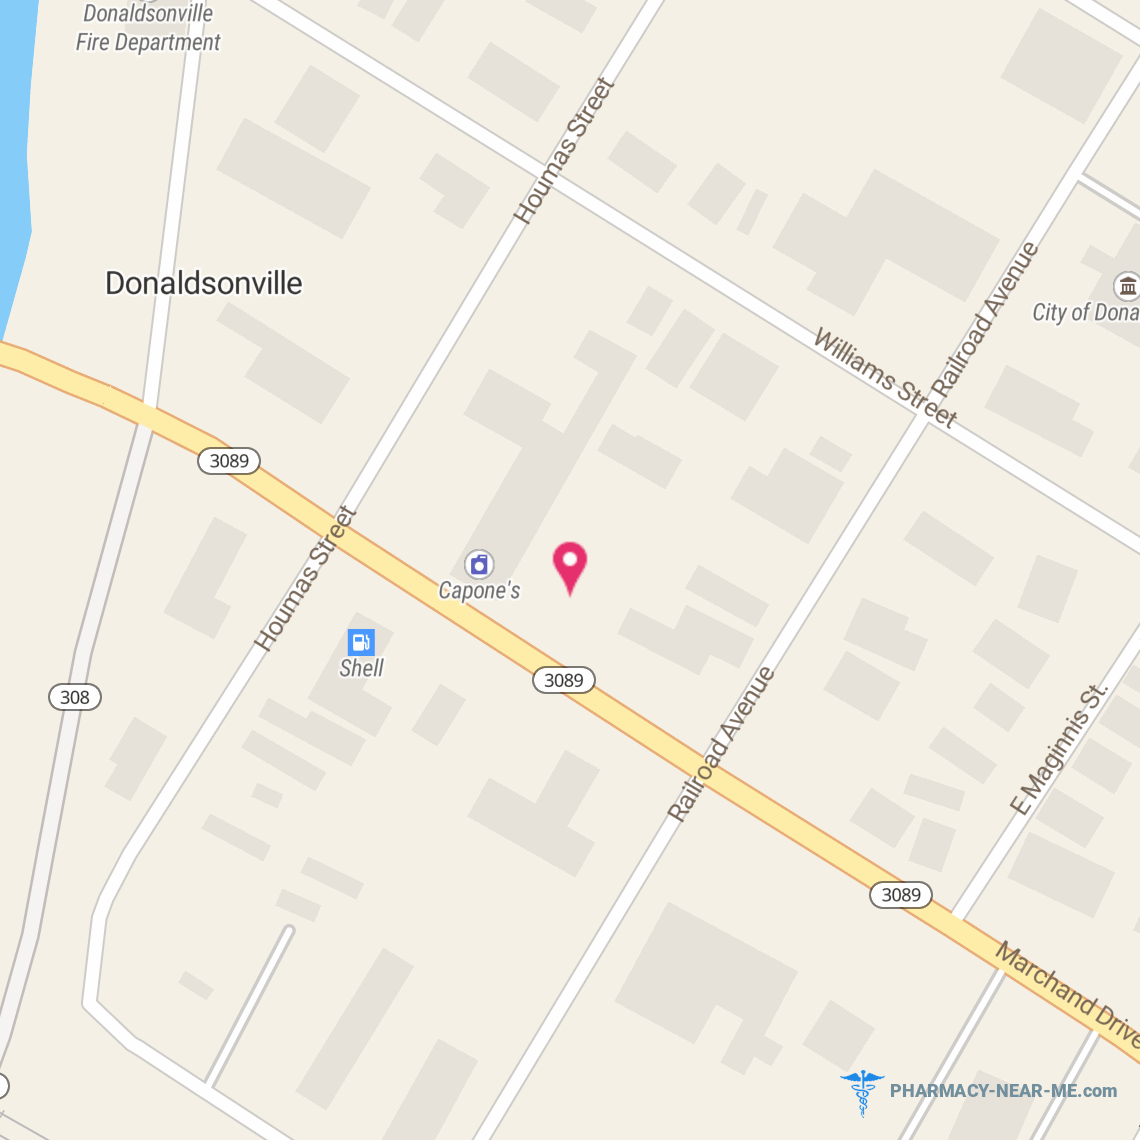 VIALLON DRUG CO OF DONALDSONVILLE - Pharmacy Hours, Phone, Reviews & Information: 309 Marchand Drive, Donaldsonville, Louisiana 70346, United States